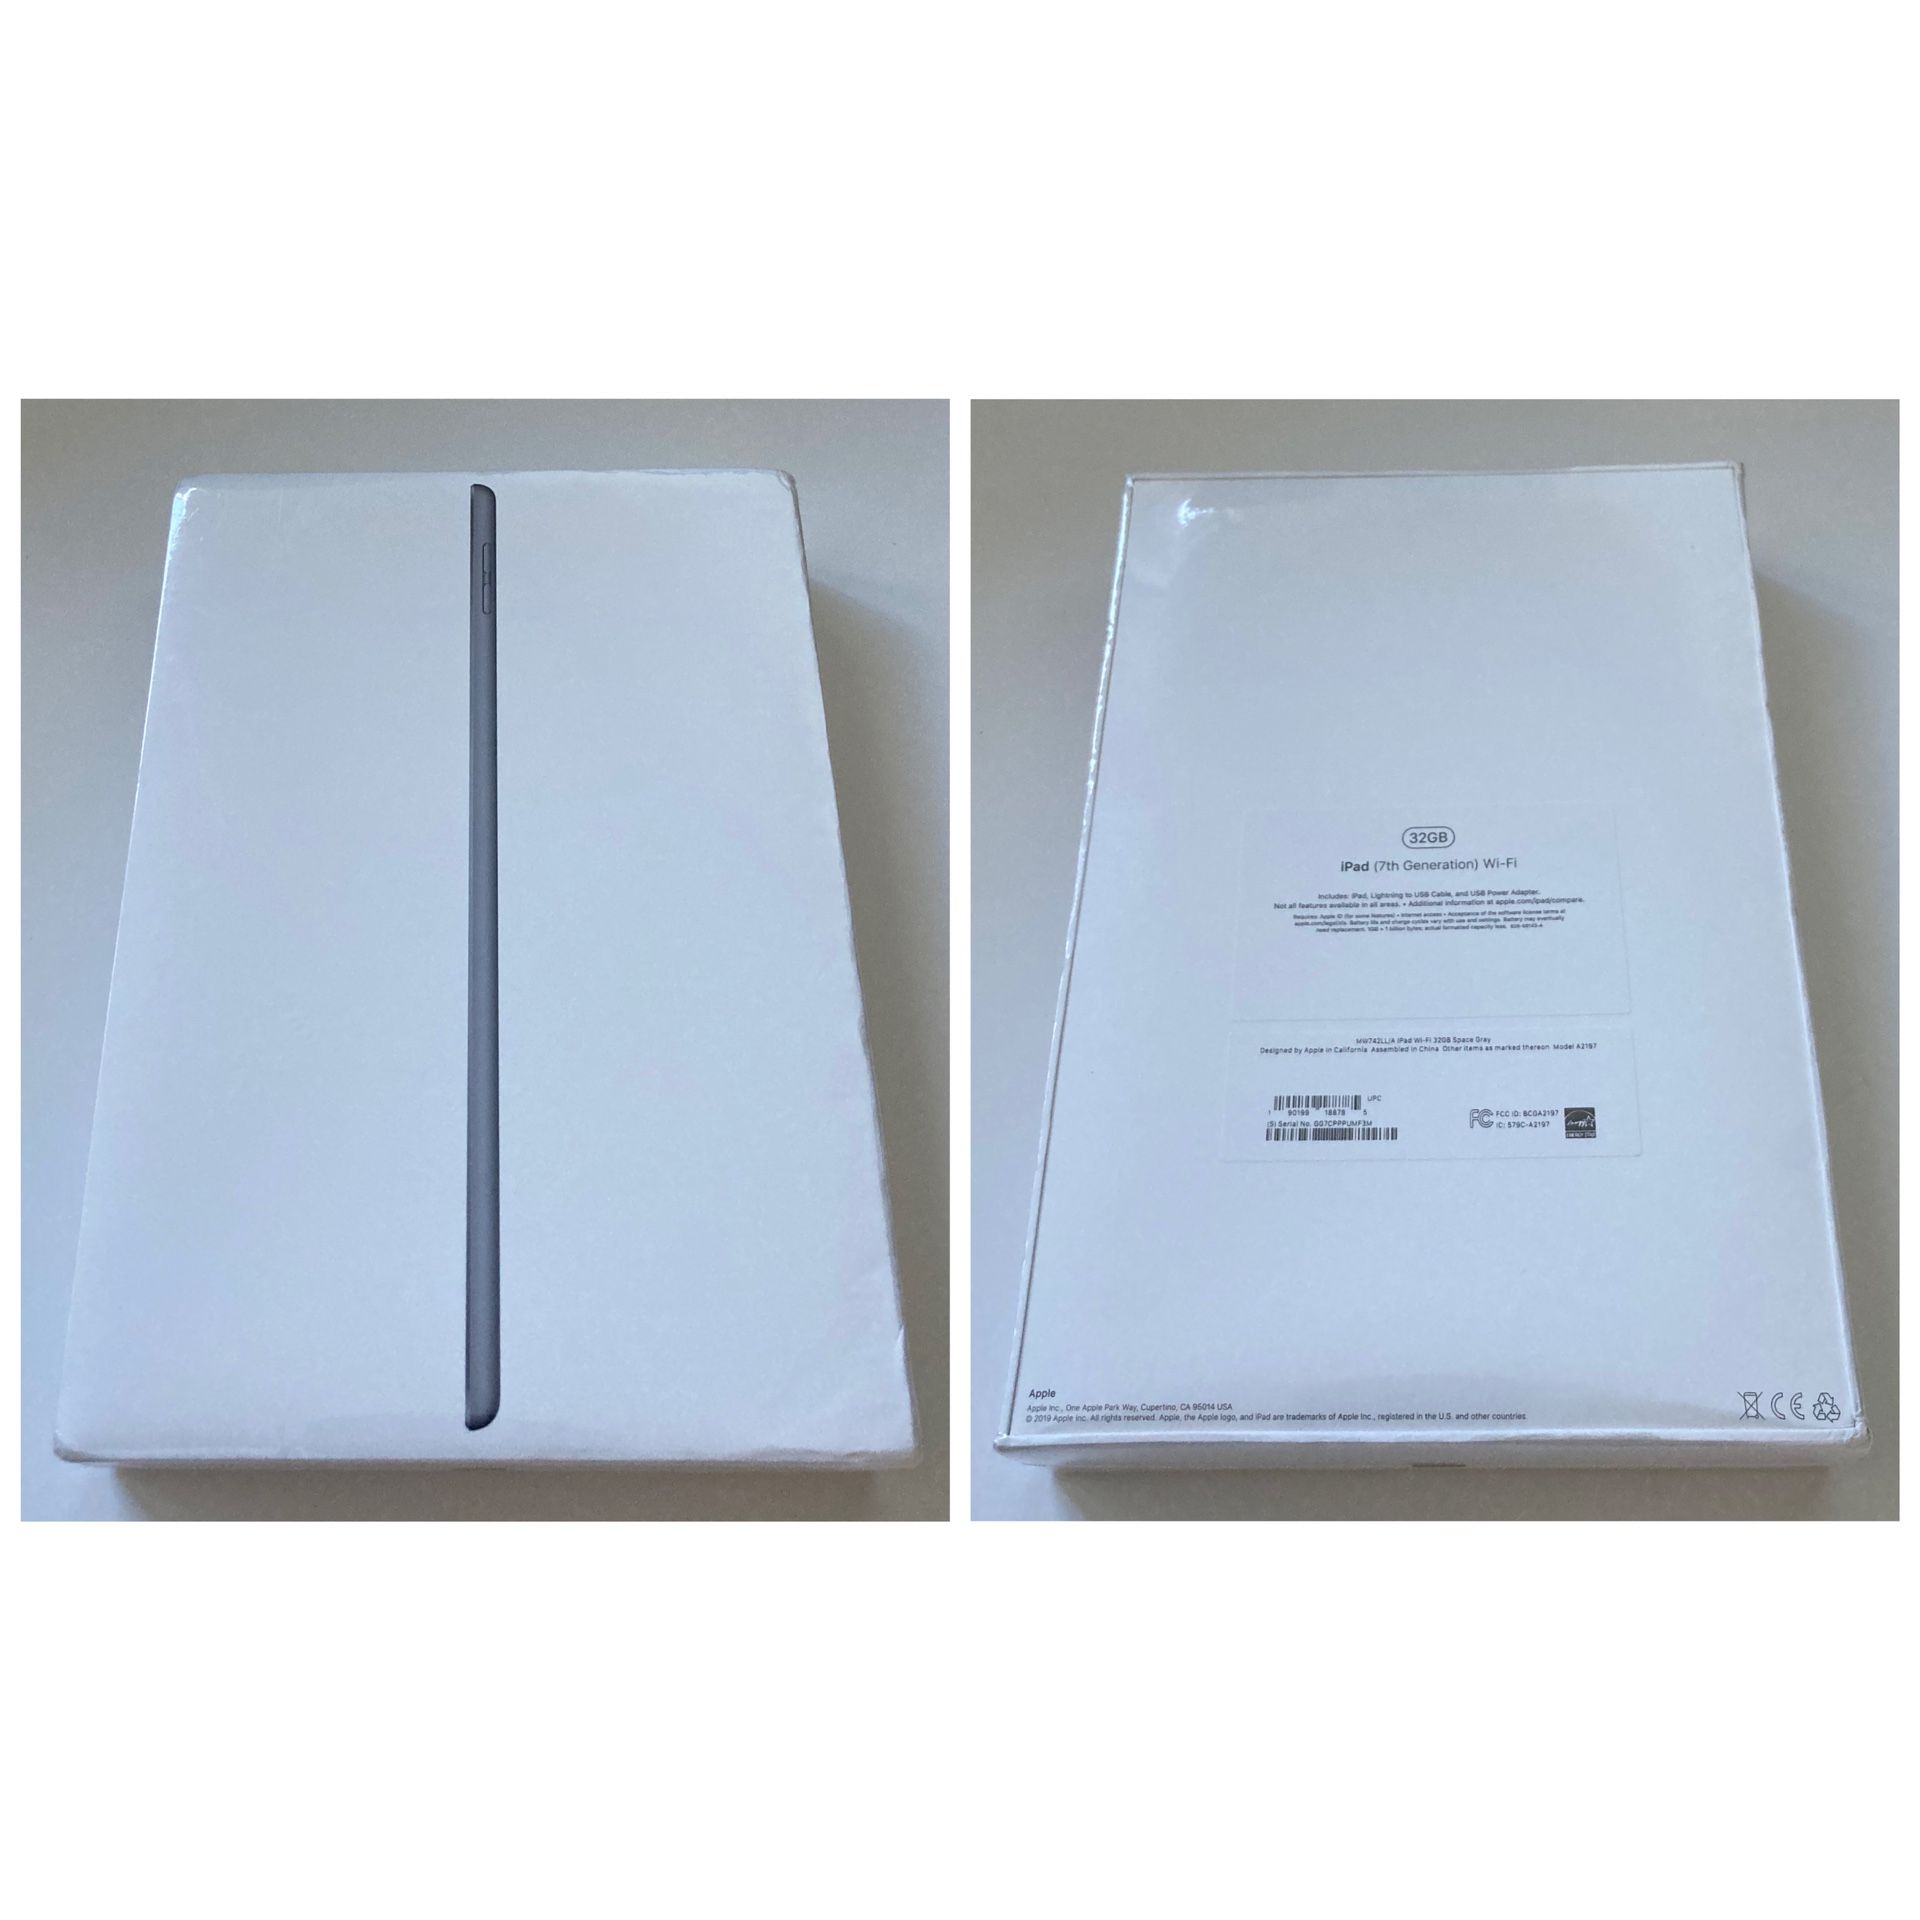 iPad 7th Generation WiFi 32GB Space Grey (Brand New in the box with 1 year of Apple Warranty) $325